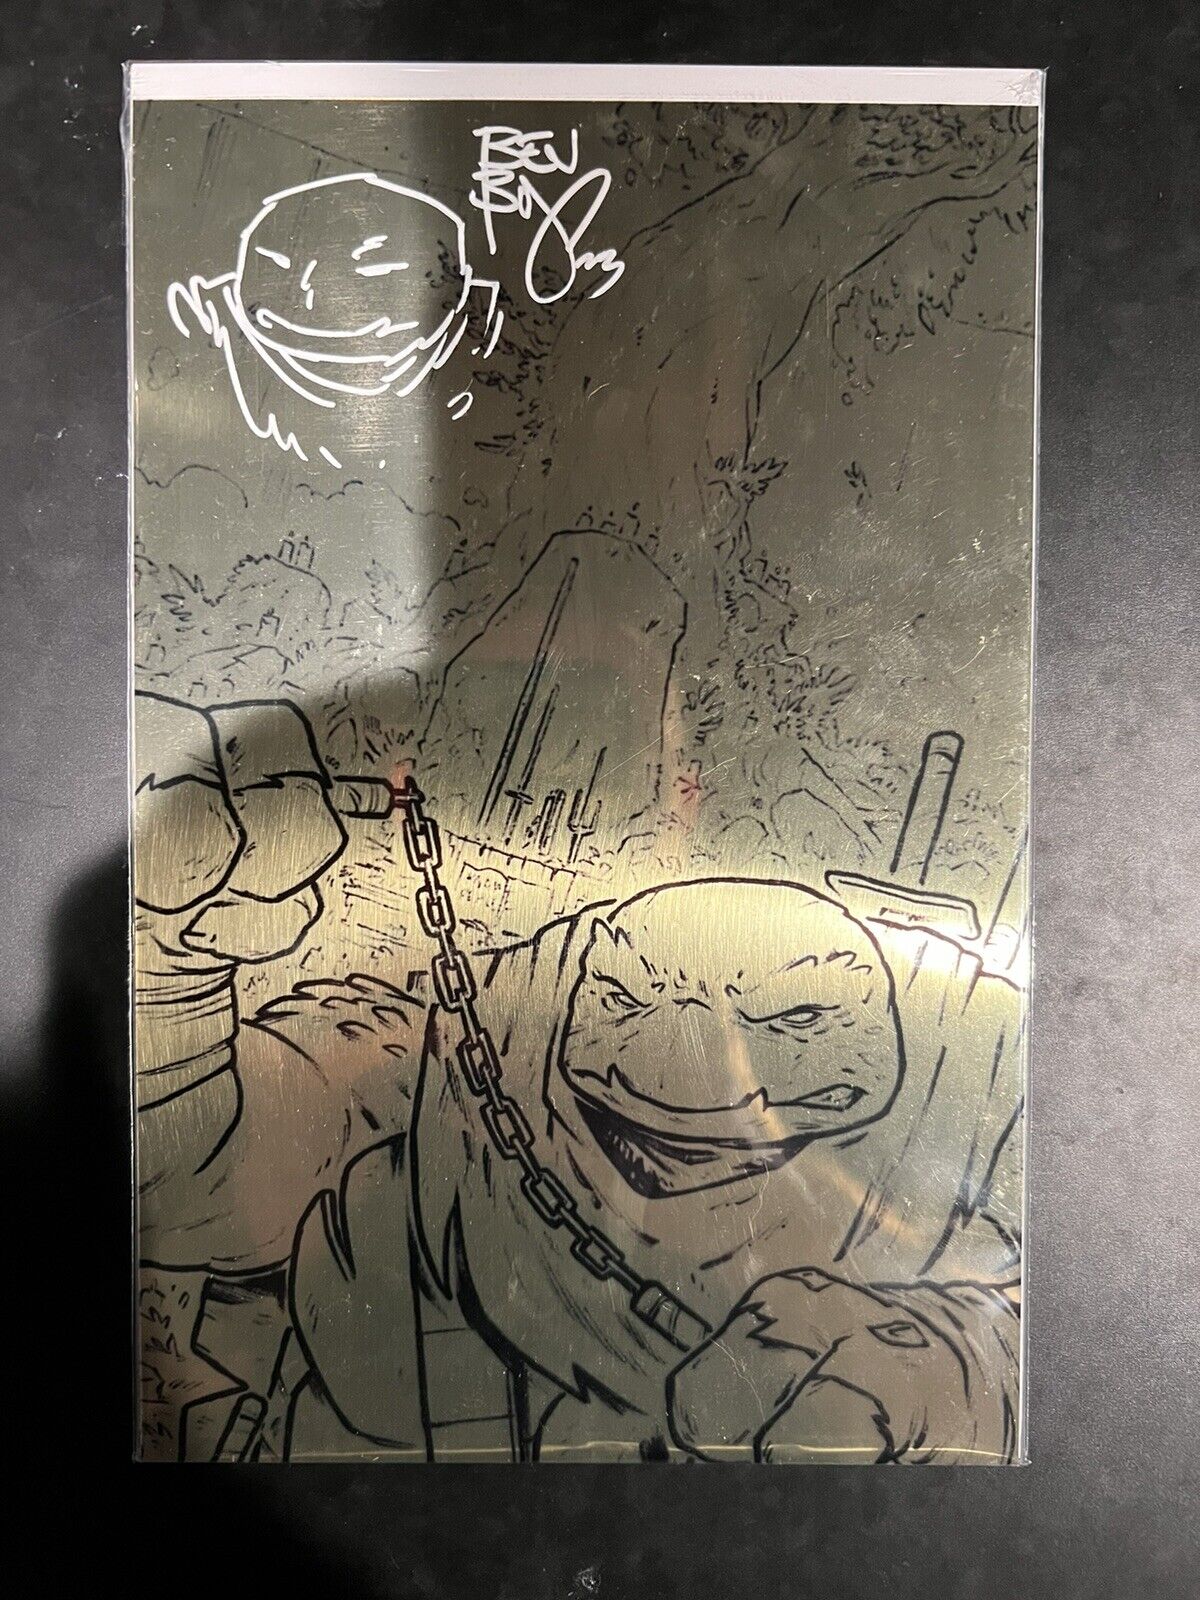 TMNT The Last Ronin Lost Years #1 Mud Pit variant Ben Bishop Limited Metal cover